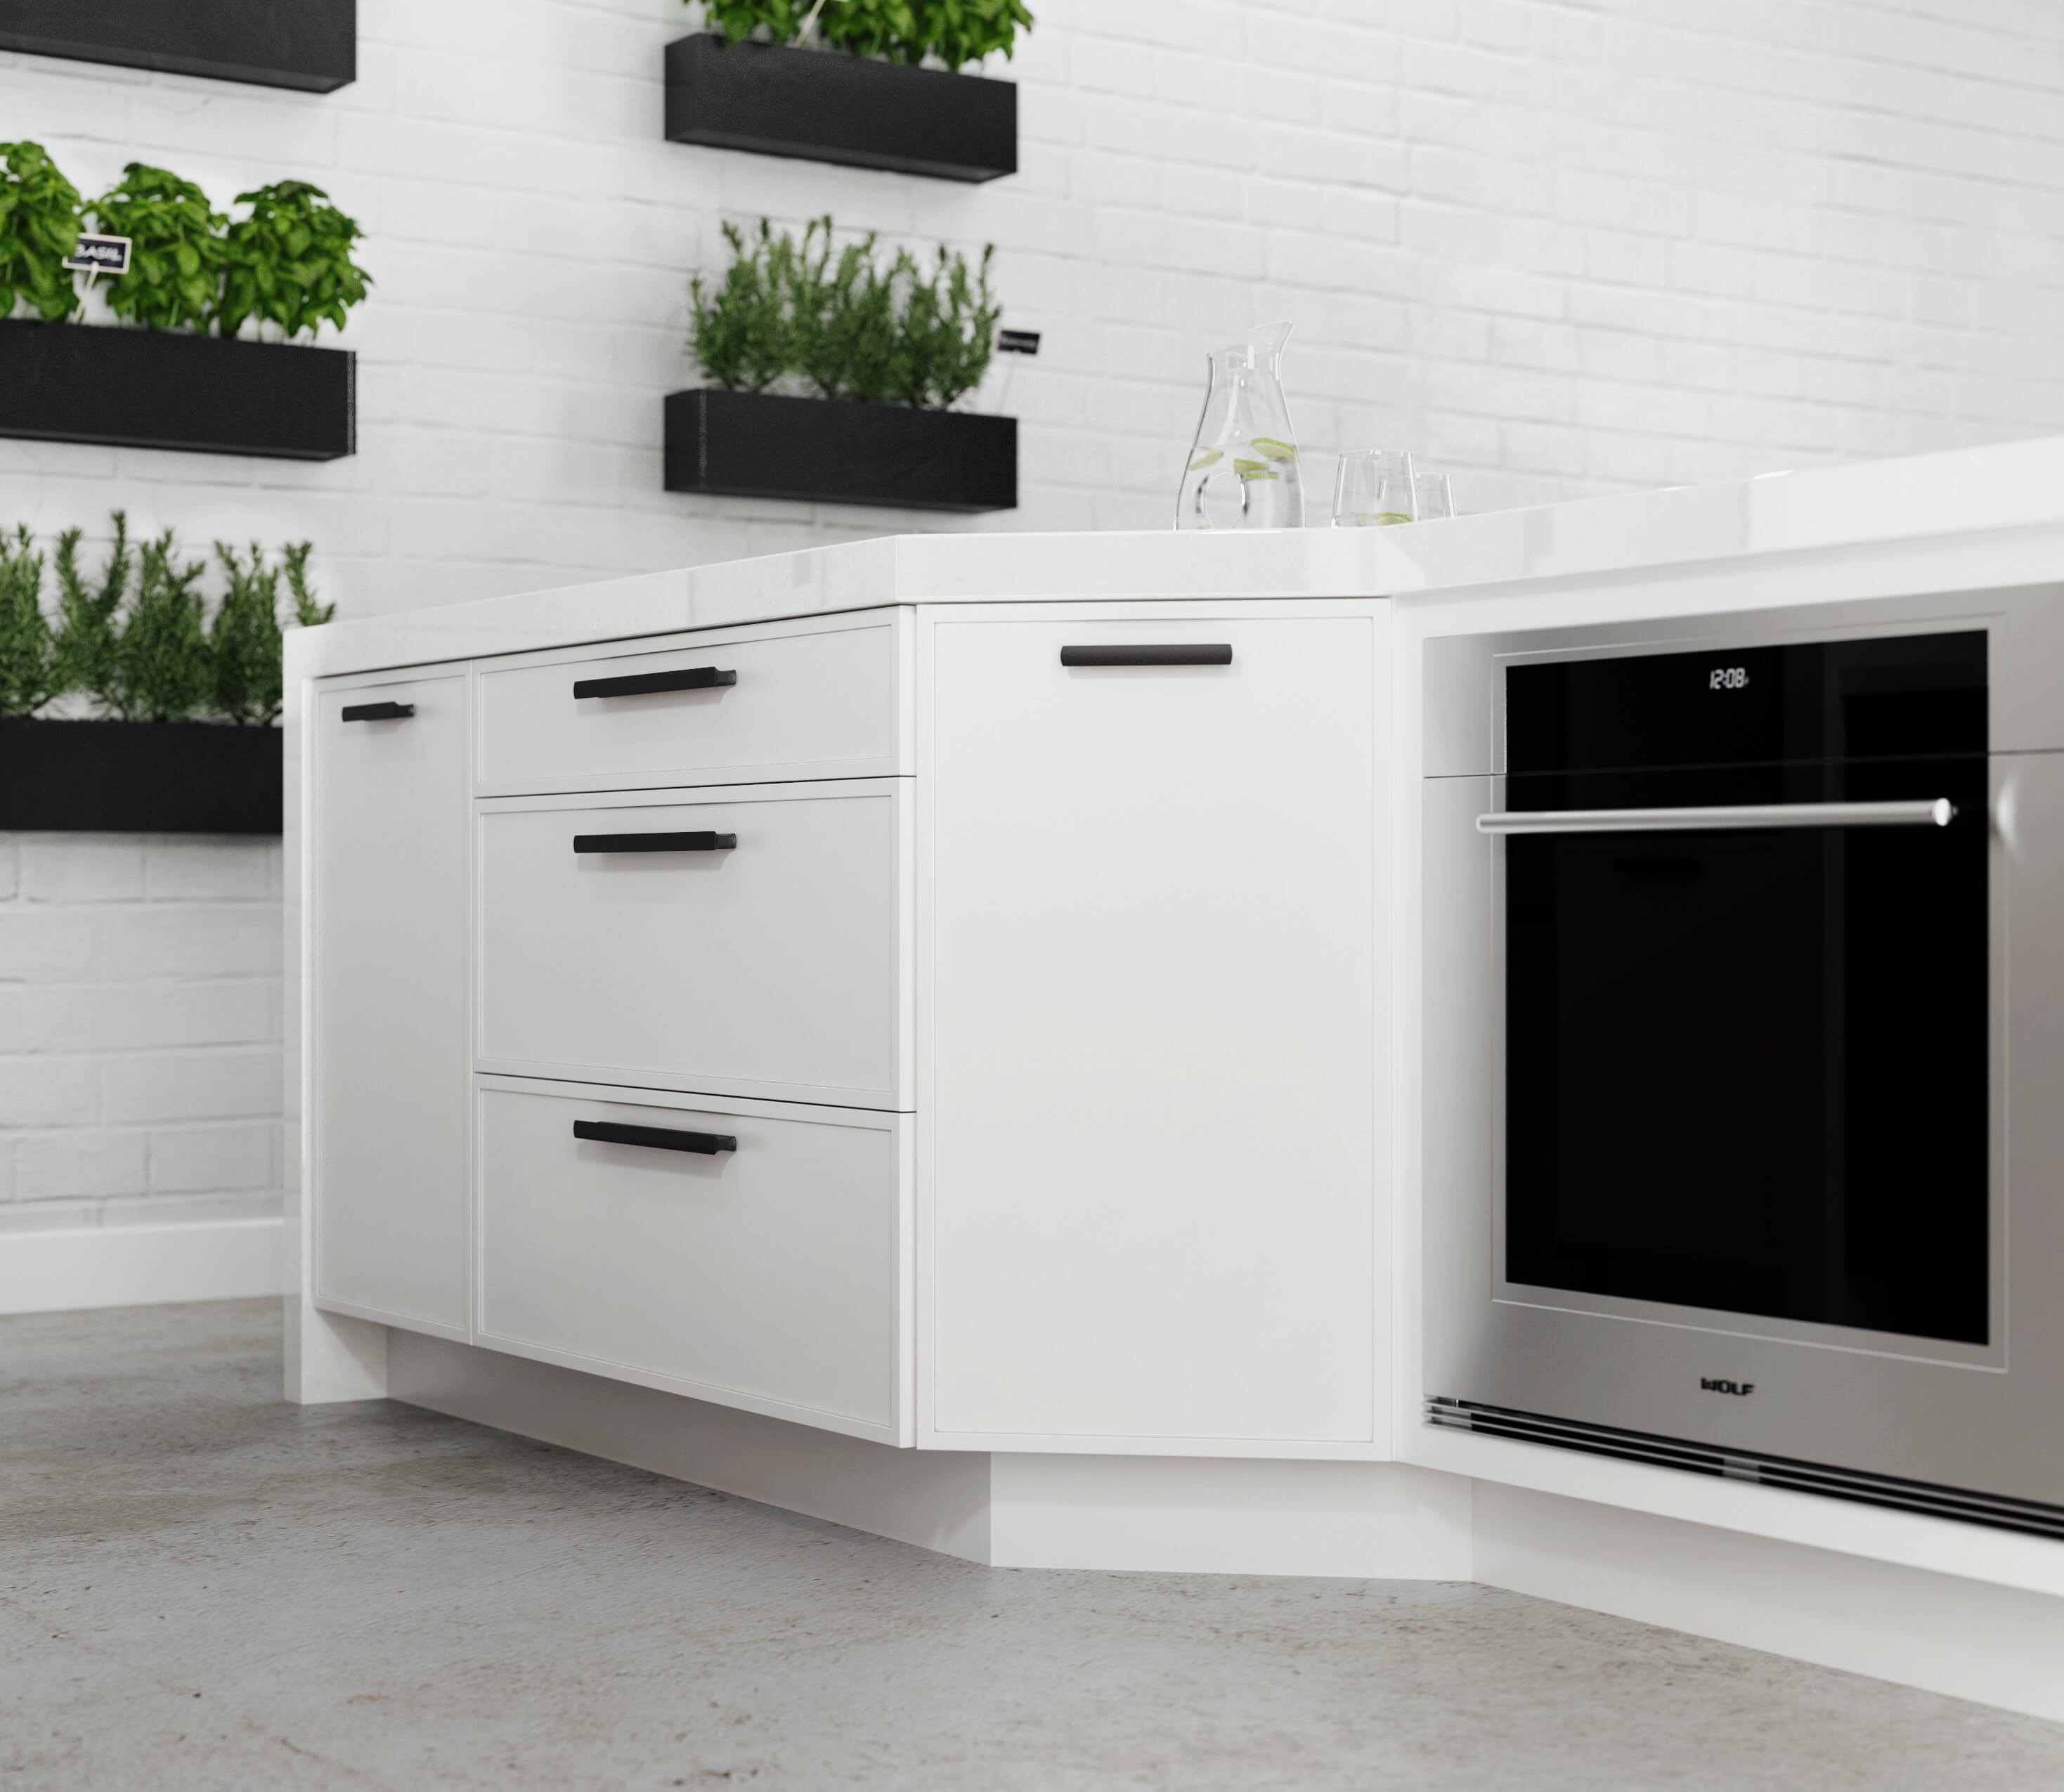 A white painted kitchen island in a modern kitchen with a skinny shaker door style.